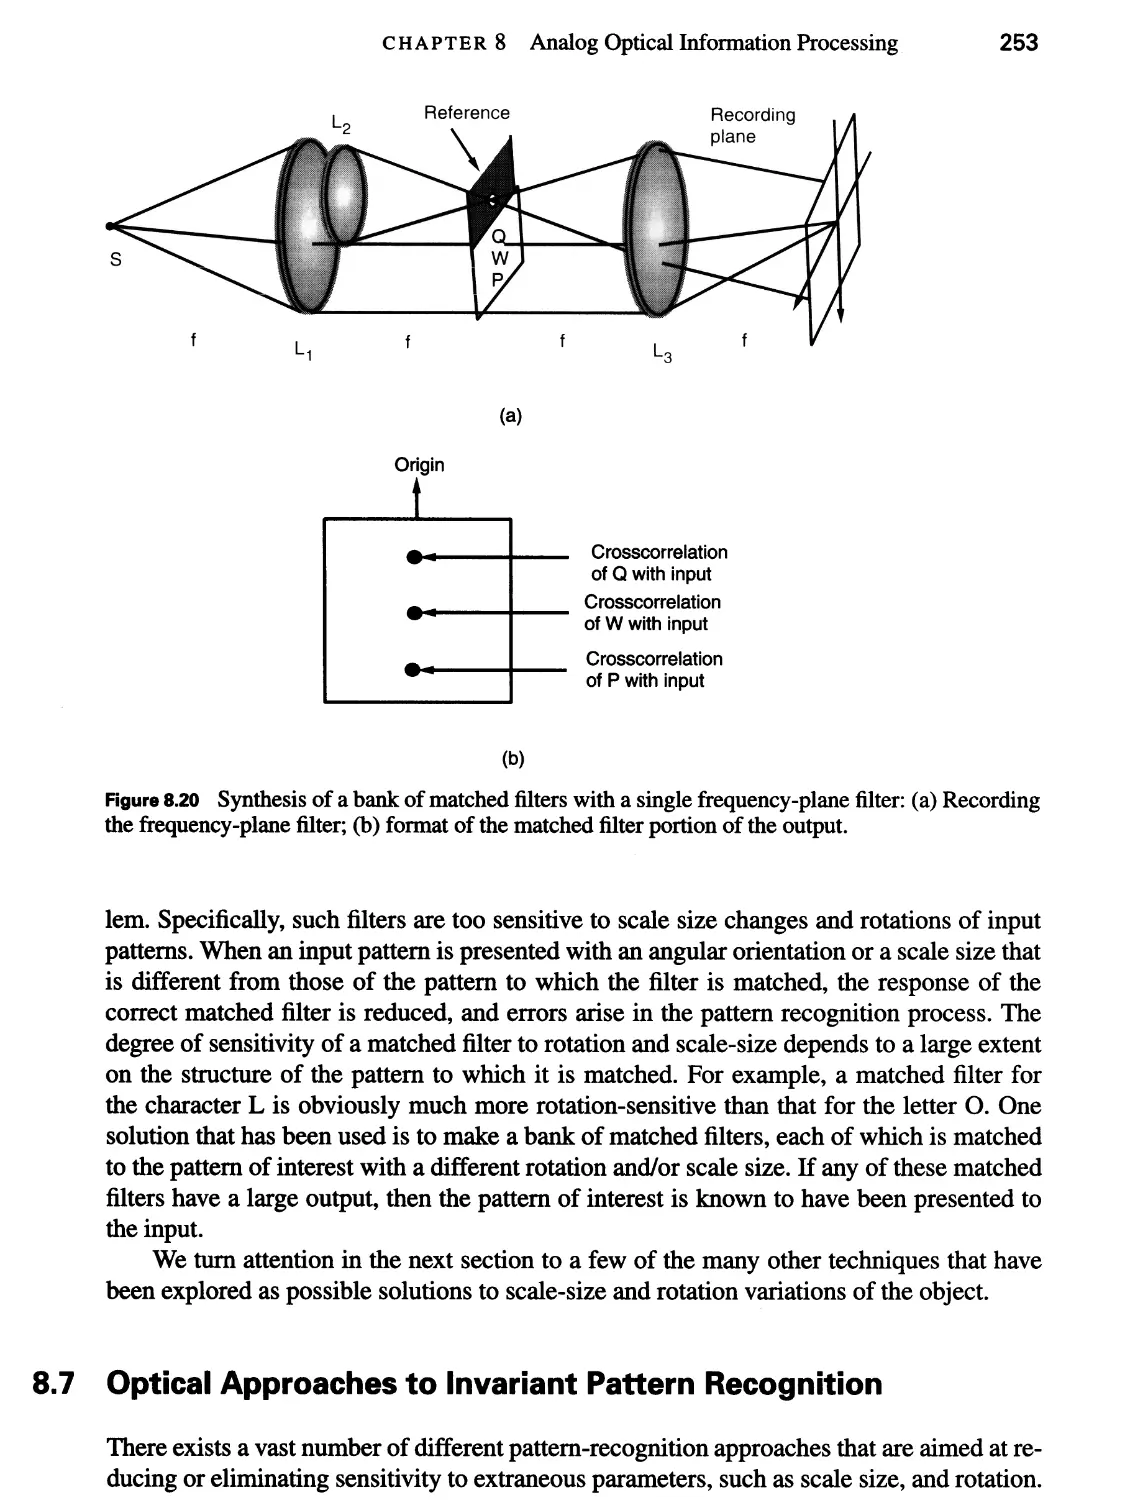 8.7 Optical Approaches to Invariant Pattern Recognition 253